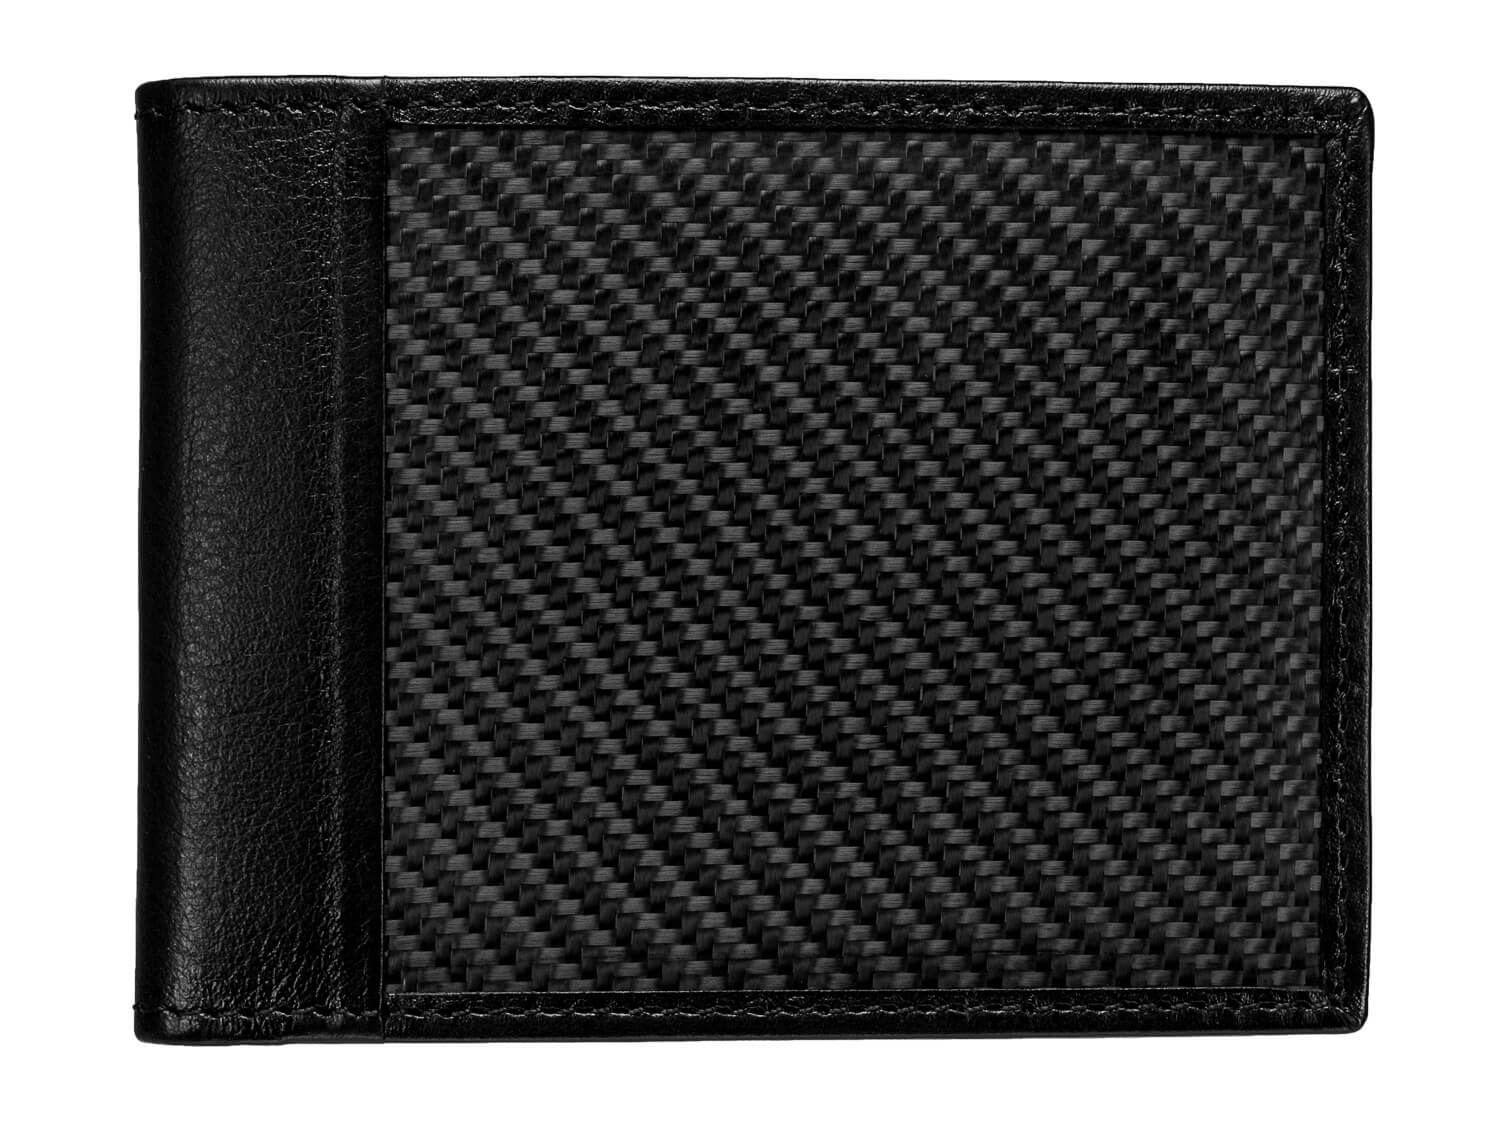 Buy wowobjects® Carbon Fiber Credit Card Holder with Metal Money Clip -  Slim Wallet Purse Card Holder for Men (Black) at Amazon.in